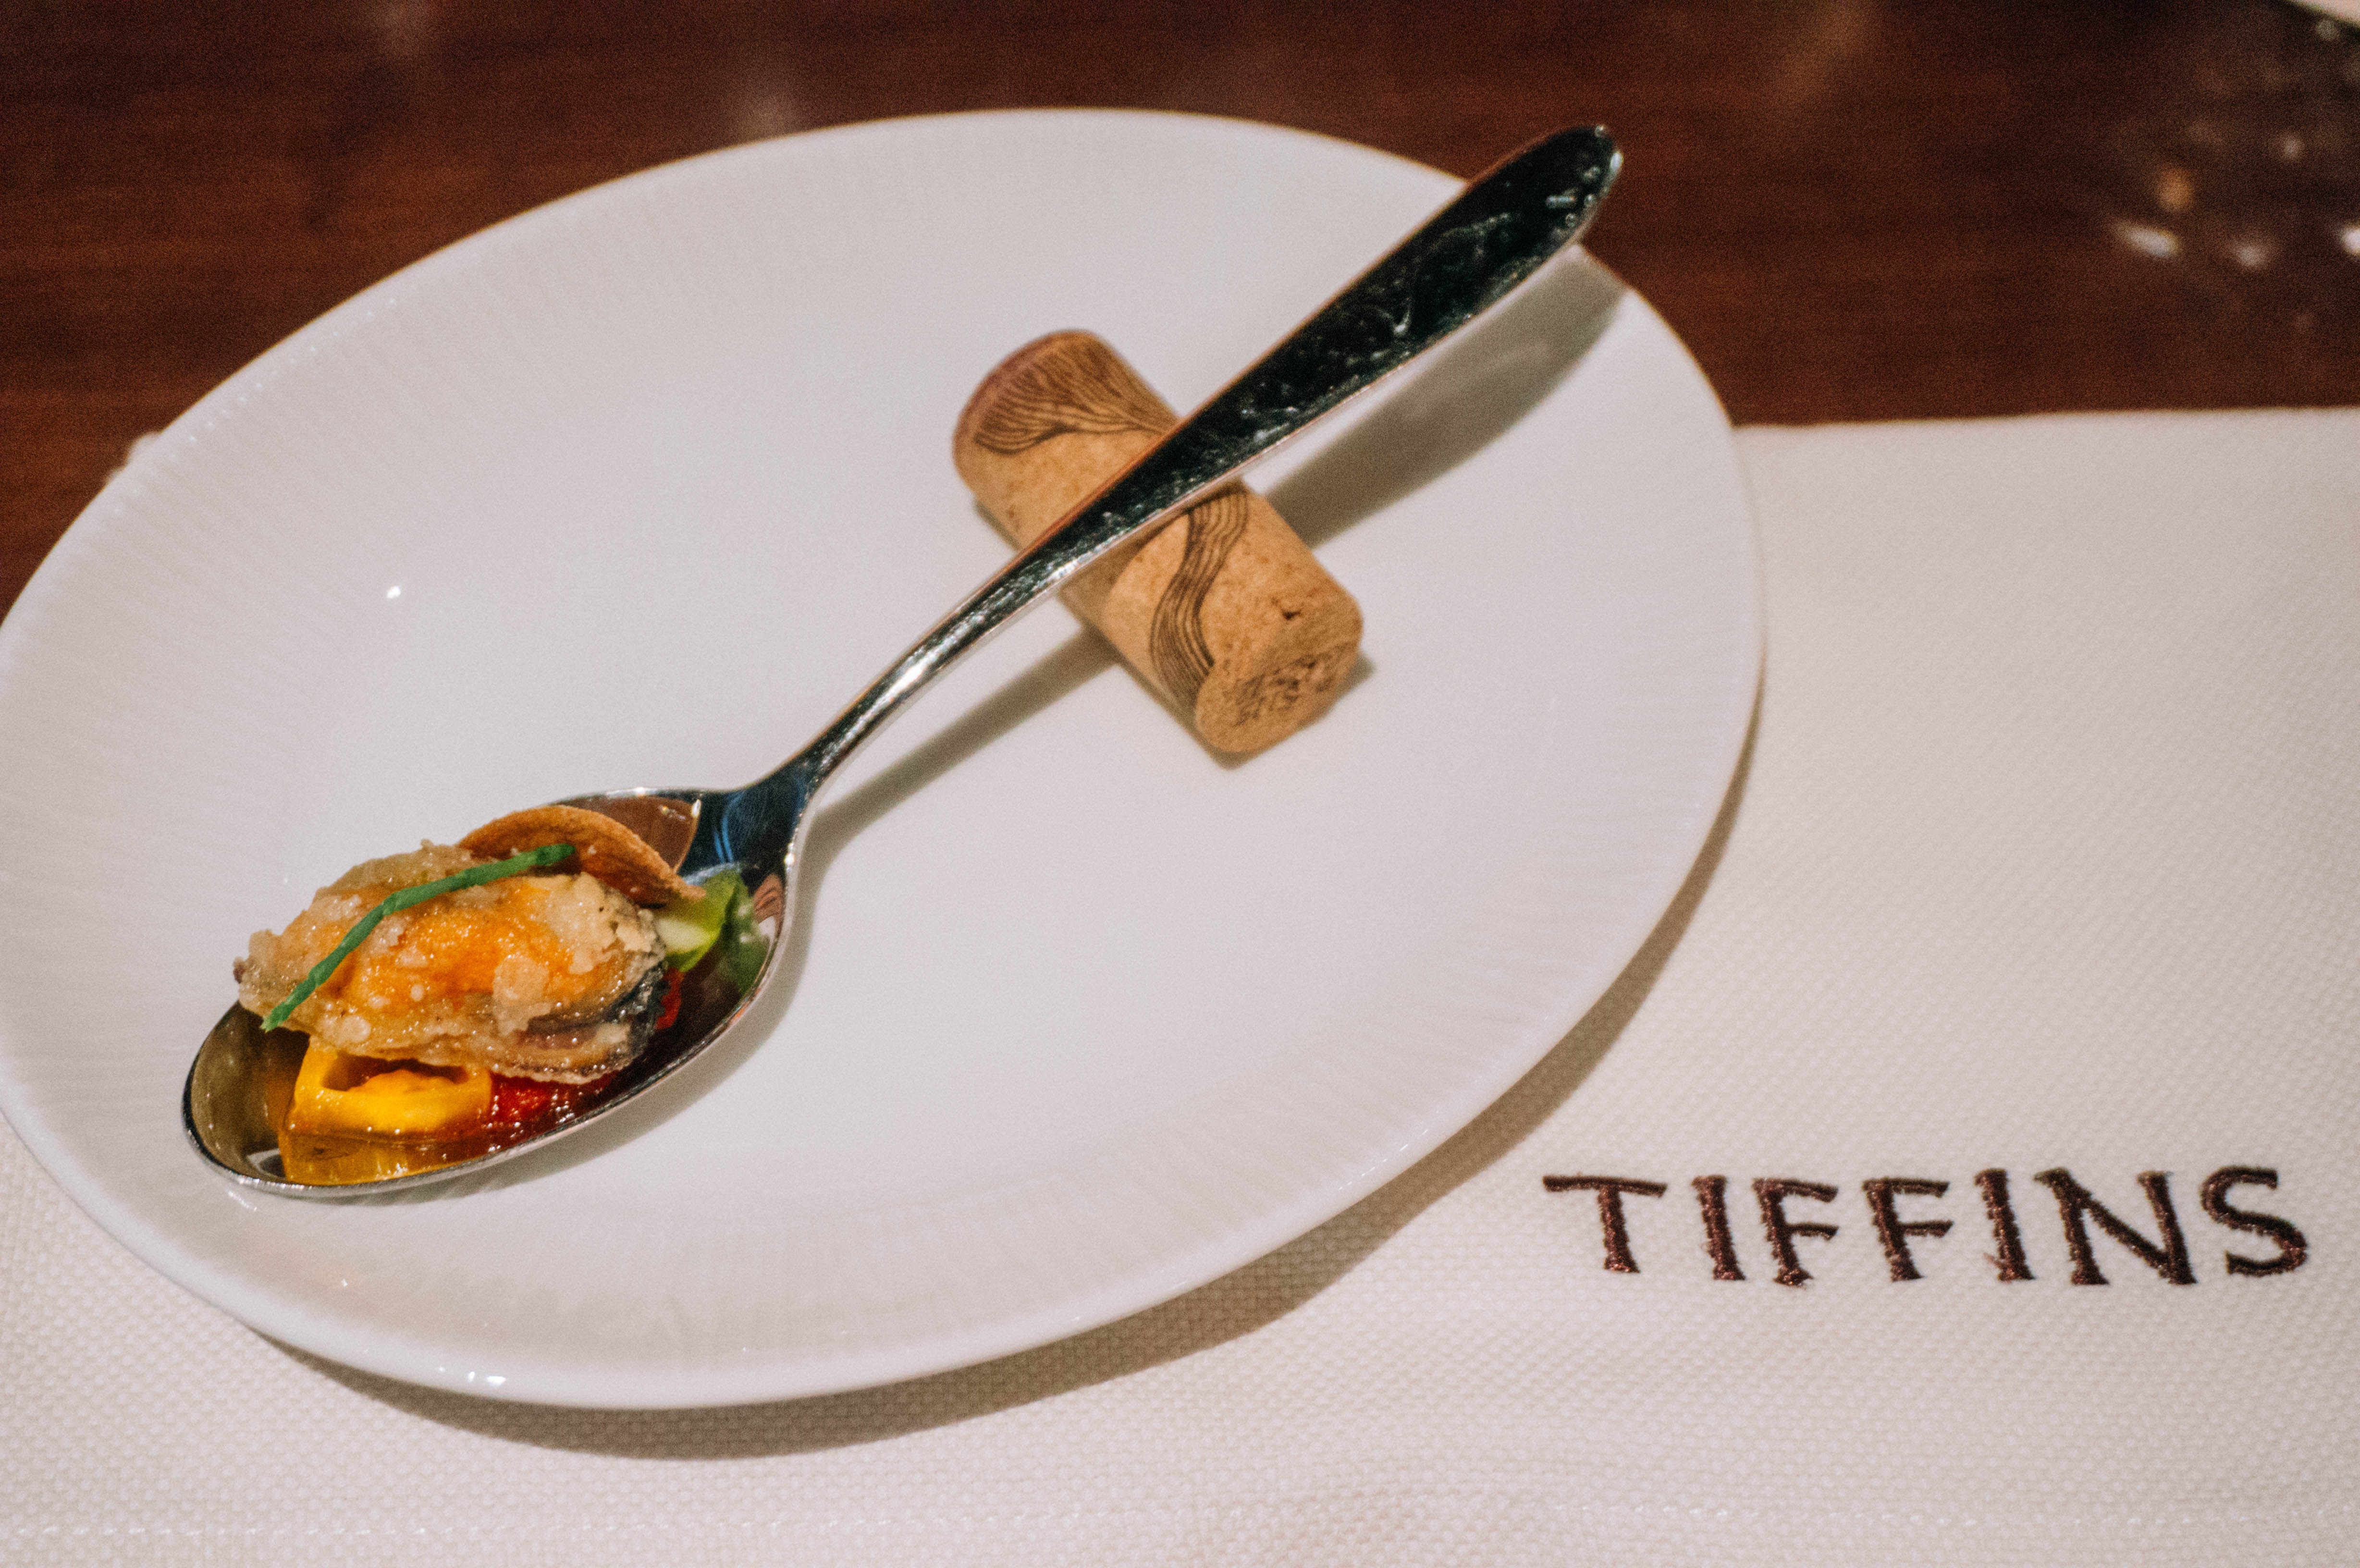 Tiffins: A New Culinary Expedition at Disney’s Animal Kingdom